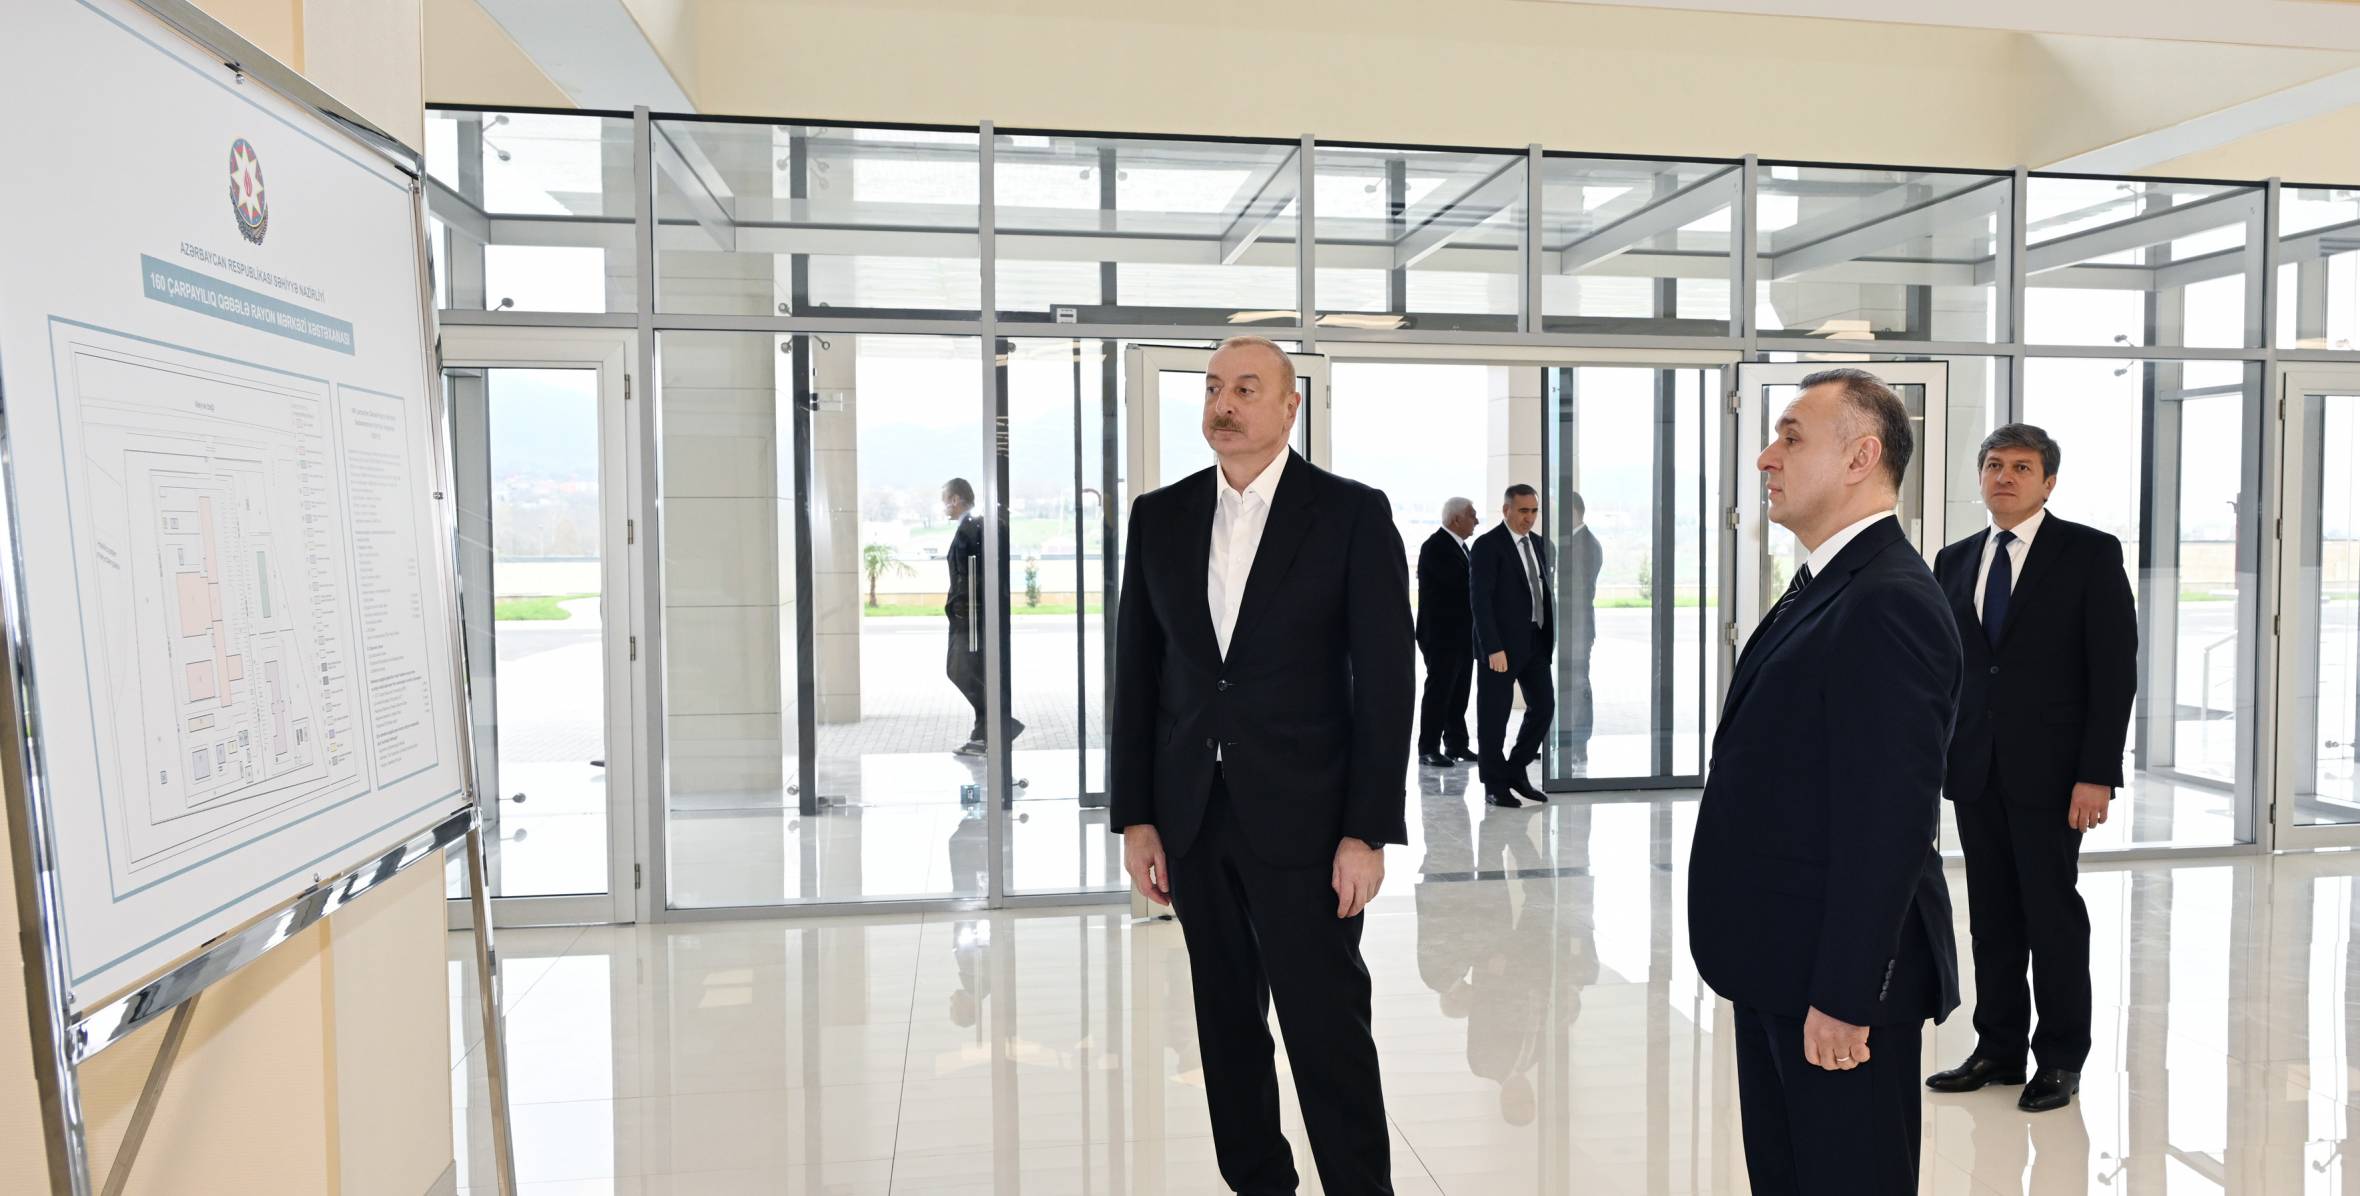 Ilham Aliyev participated in the opening ceremony of the Qabala District Central Hospital